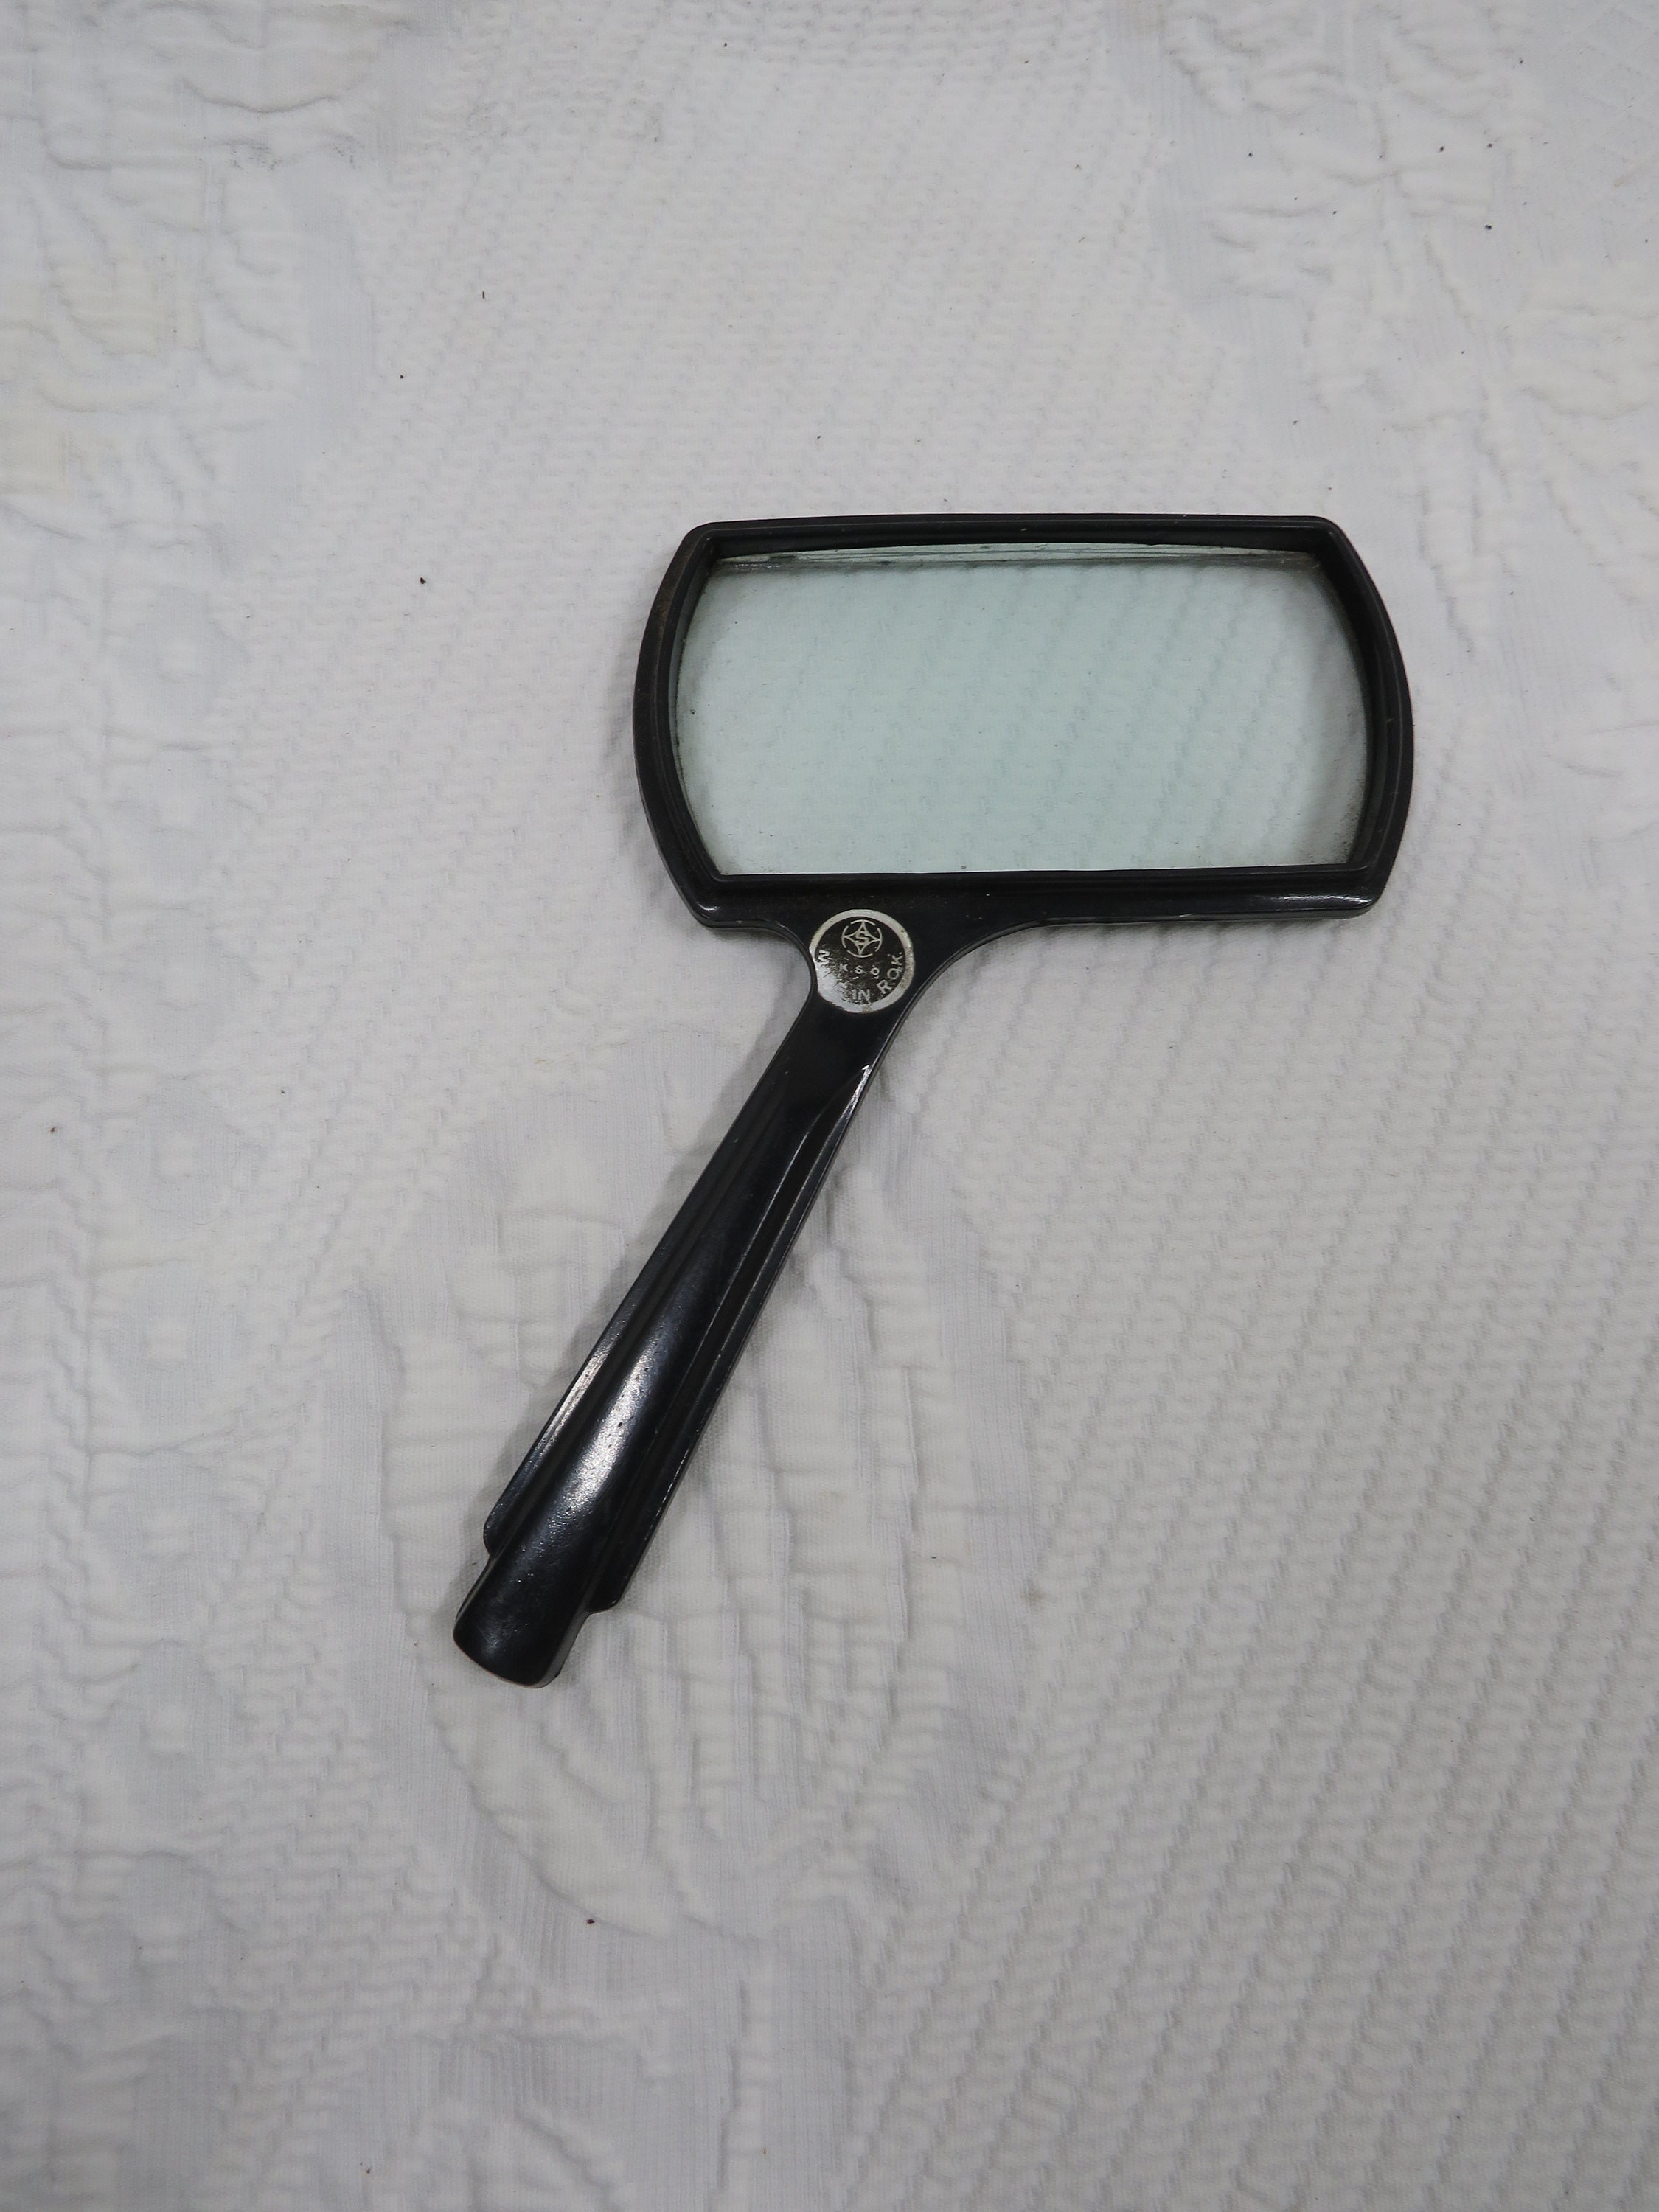 Jewelers Head Magnifying Glasses Half Frame Telesight Magnifier